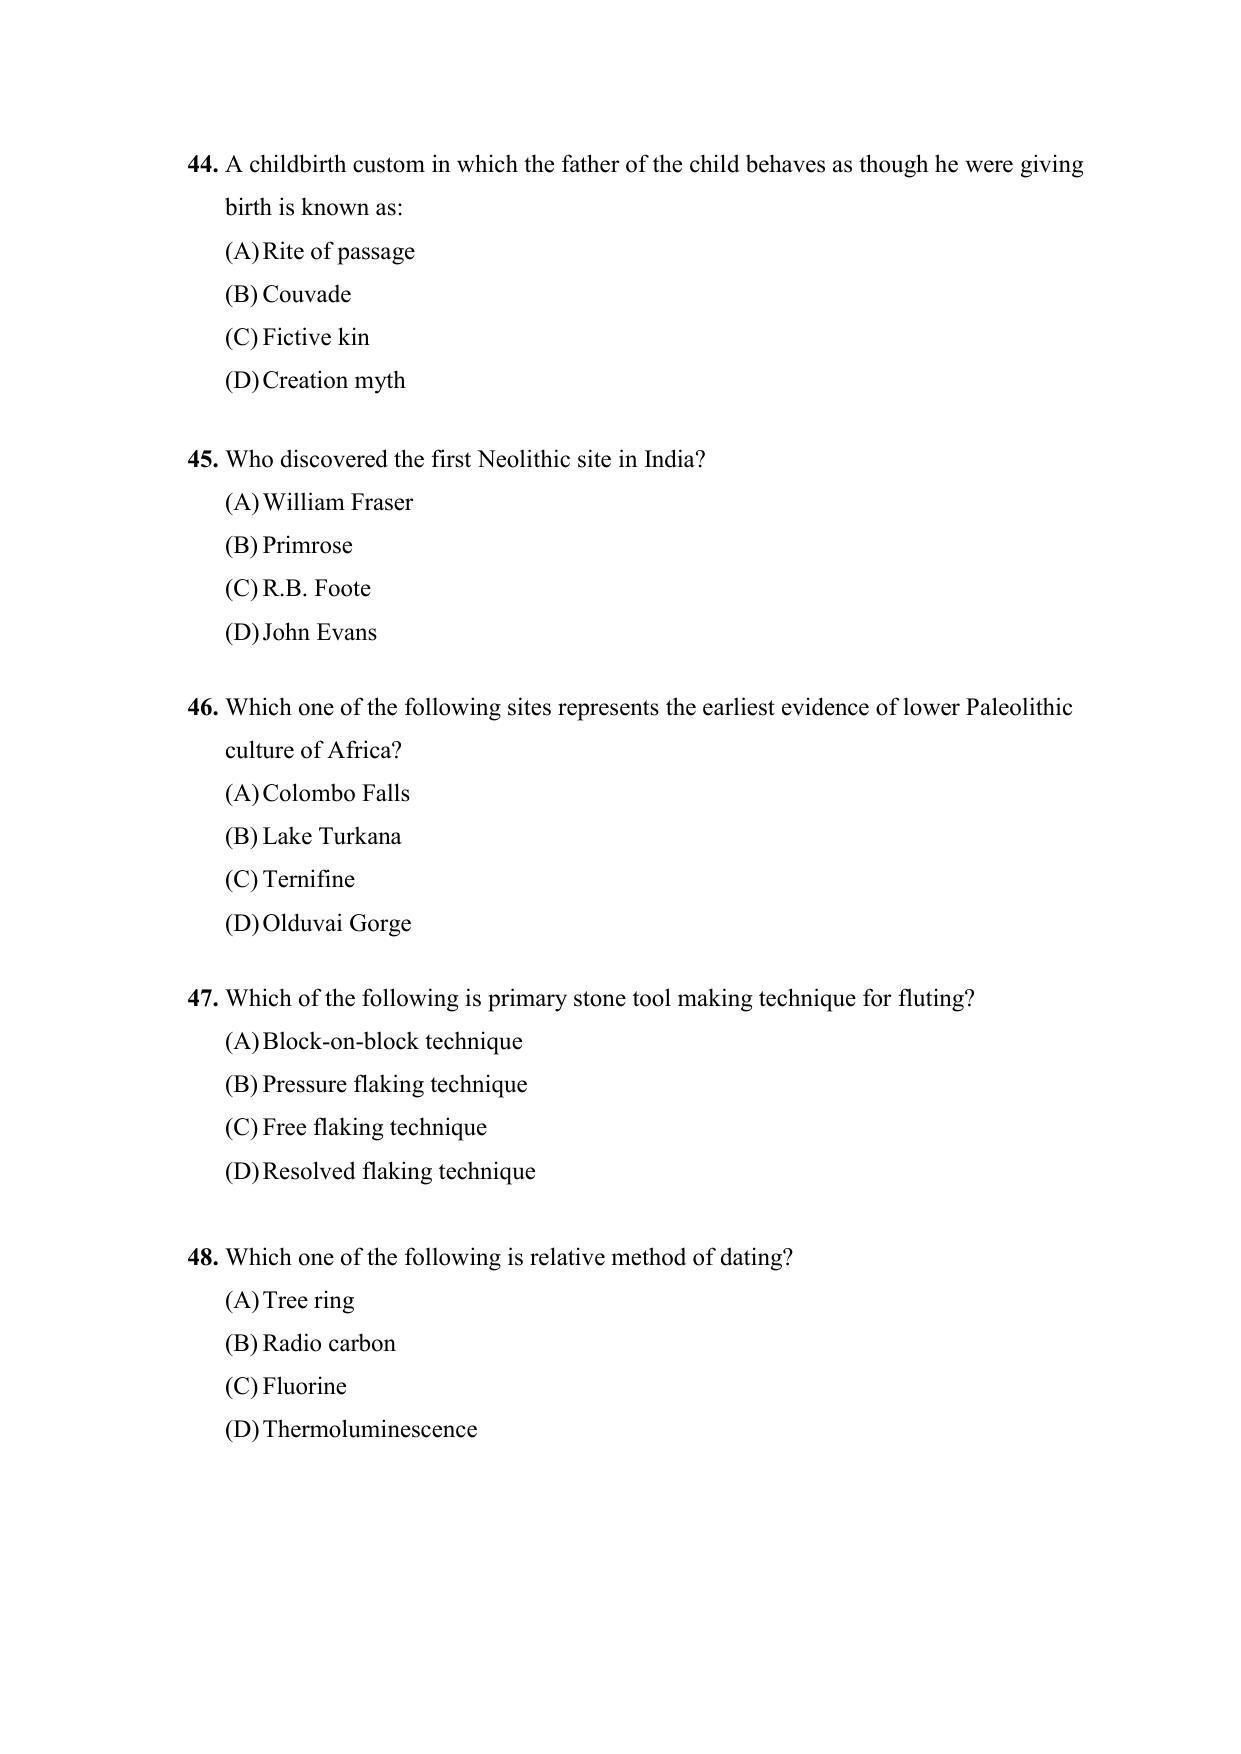 PU MPET Anthropology 2022 Question Papers - Page 9